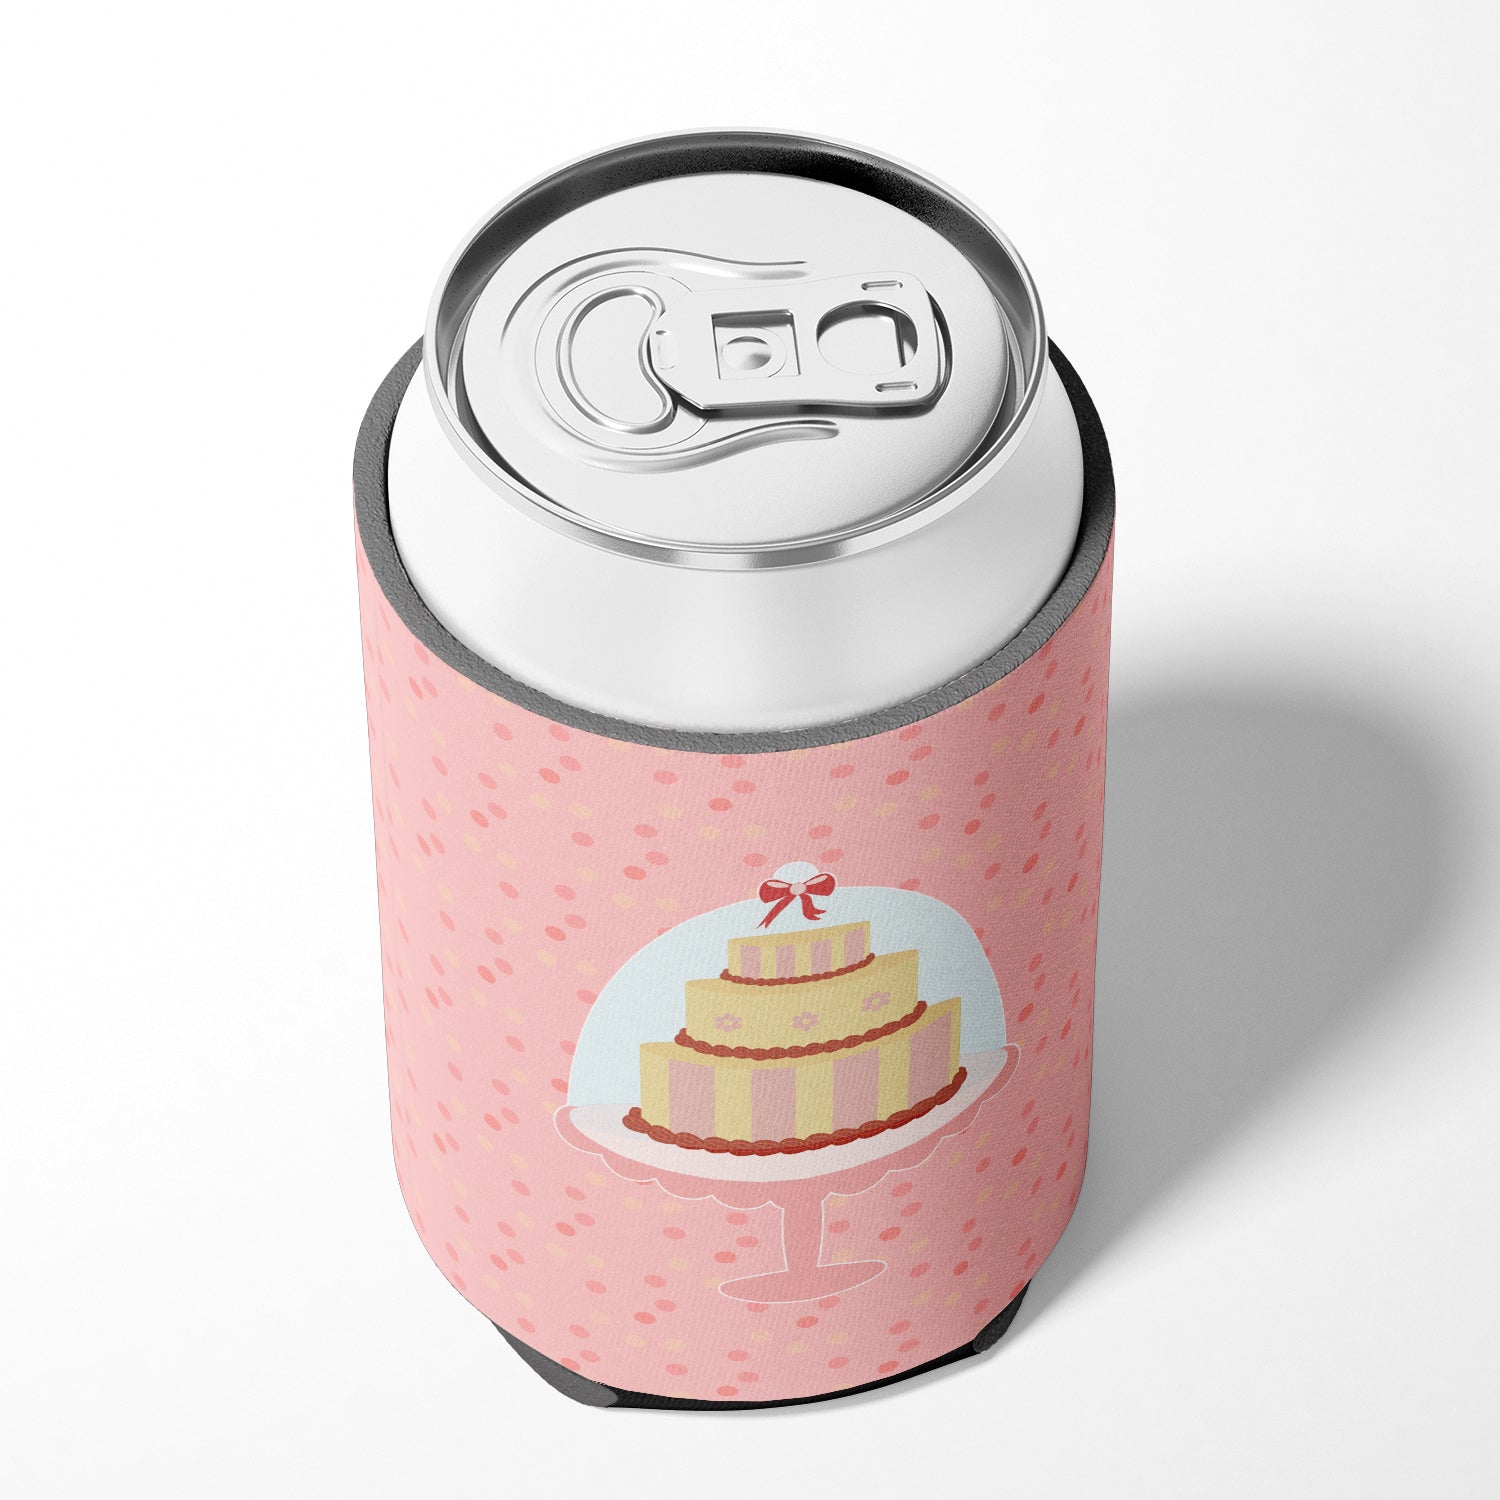 Decorative Cake 3 Tier Pink Can or Bottle Hugger BB7275CC